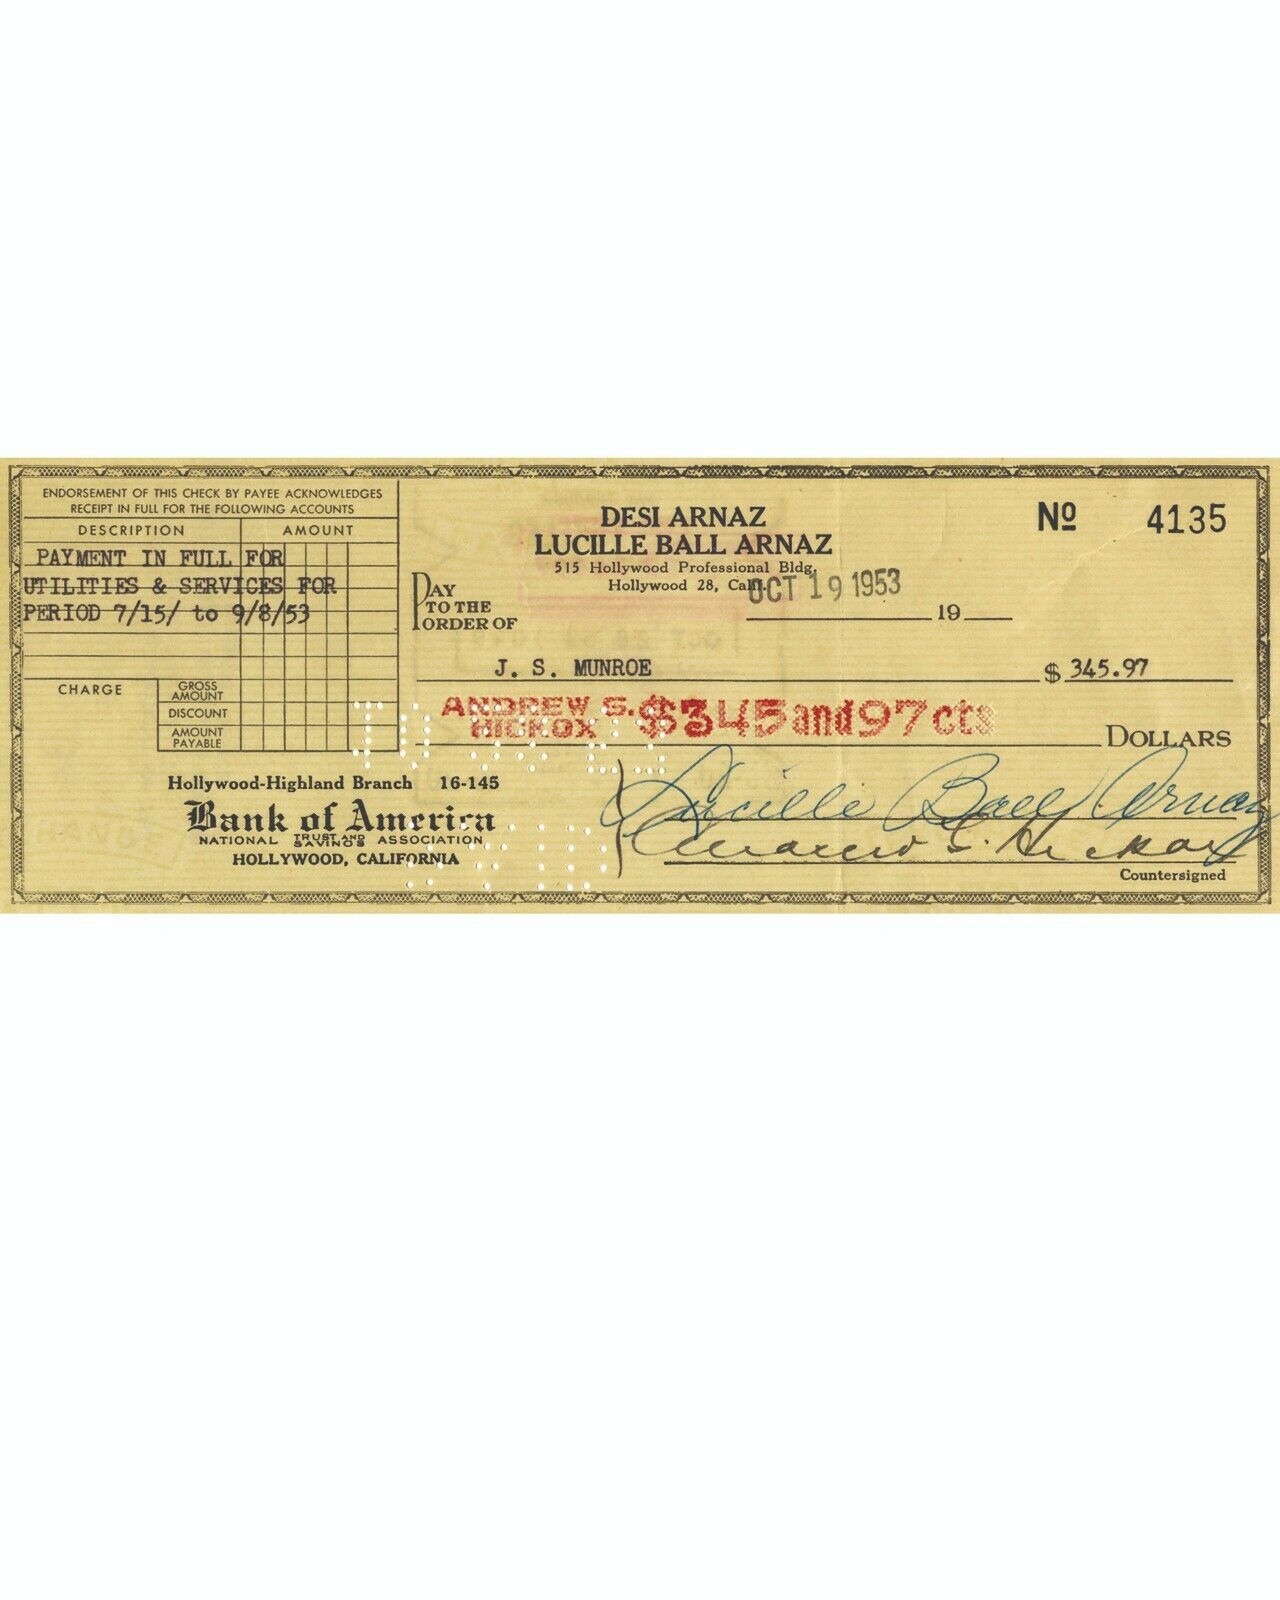 Lucille Ball and Desi Arnaz Reproduction Cancelled Check and 8 x 10 Photo 